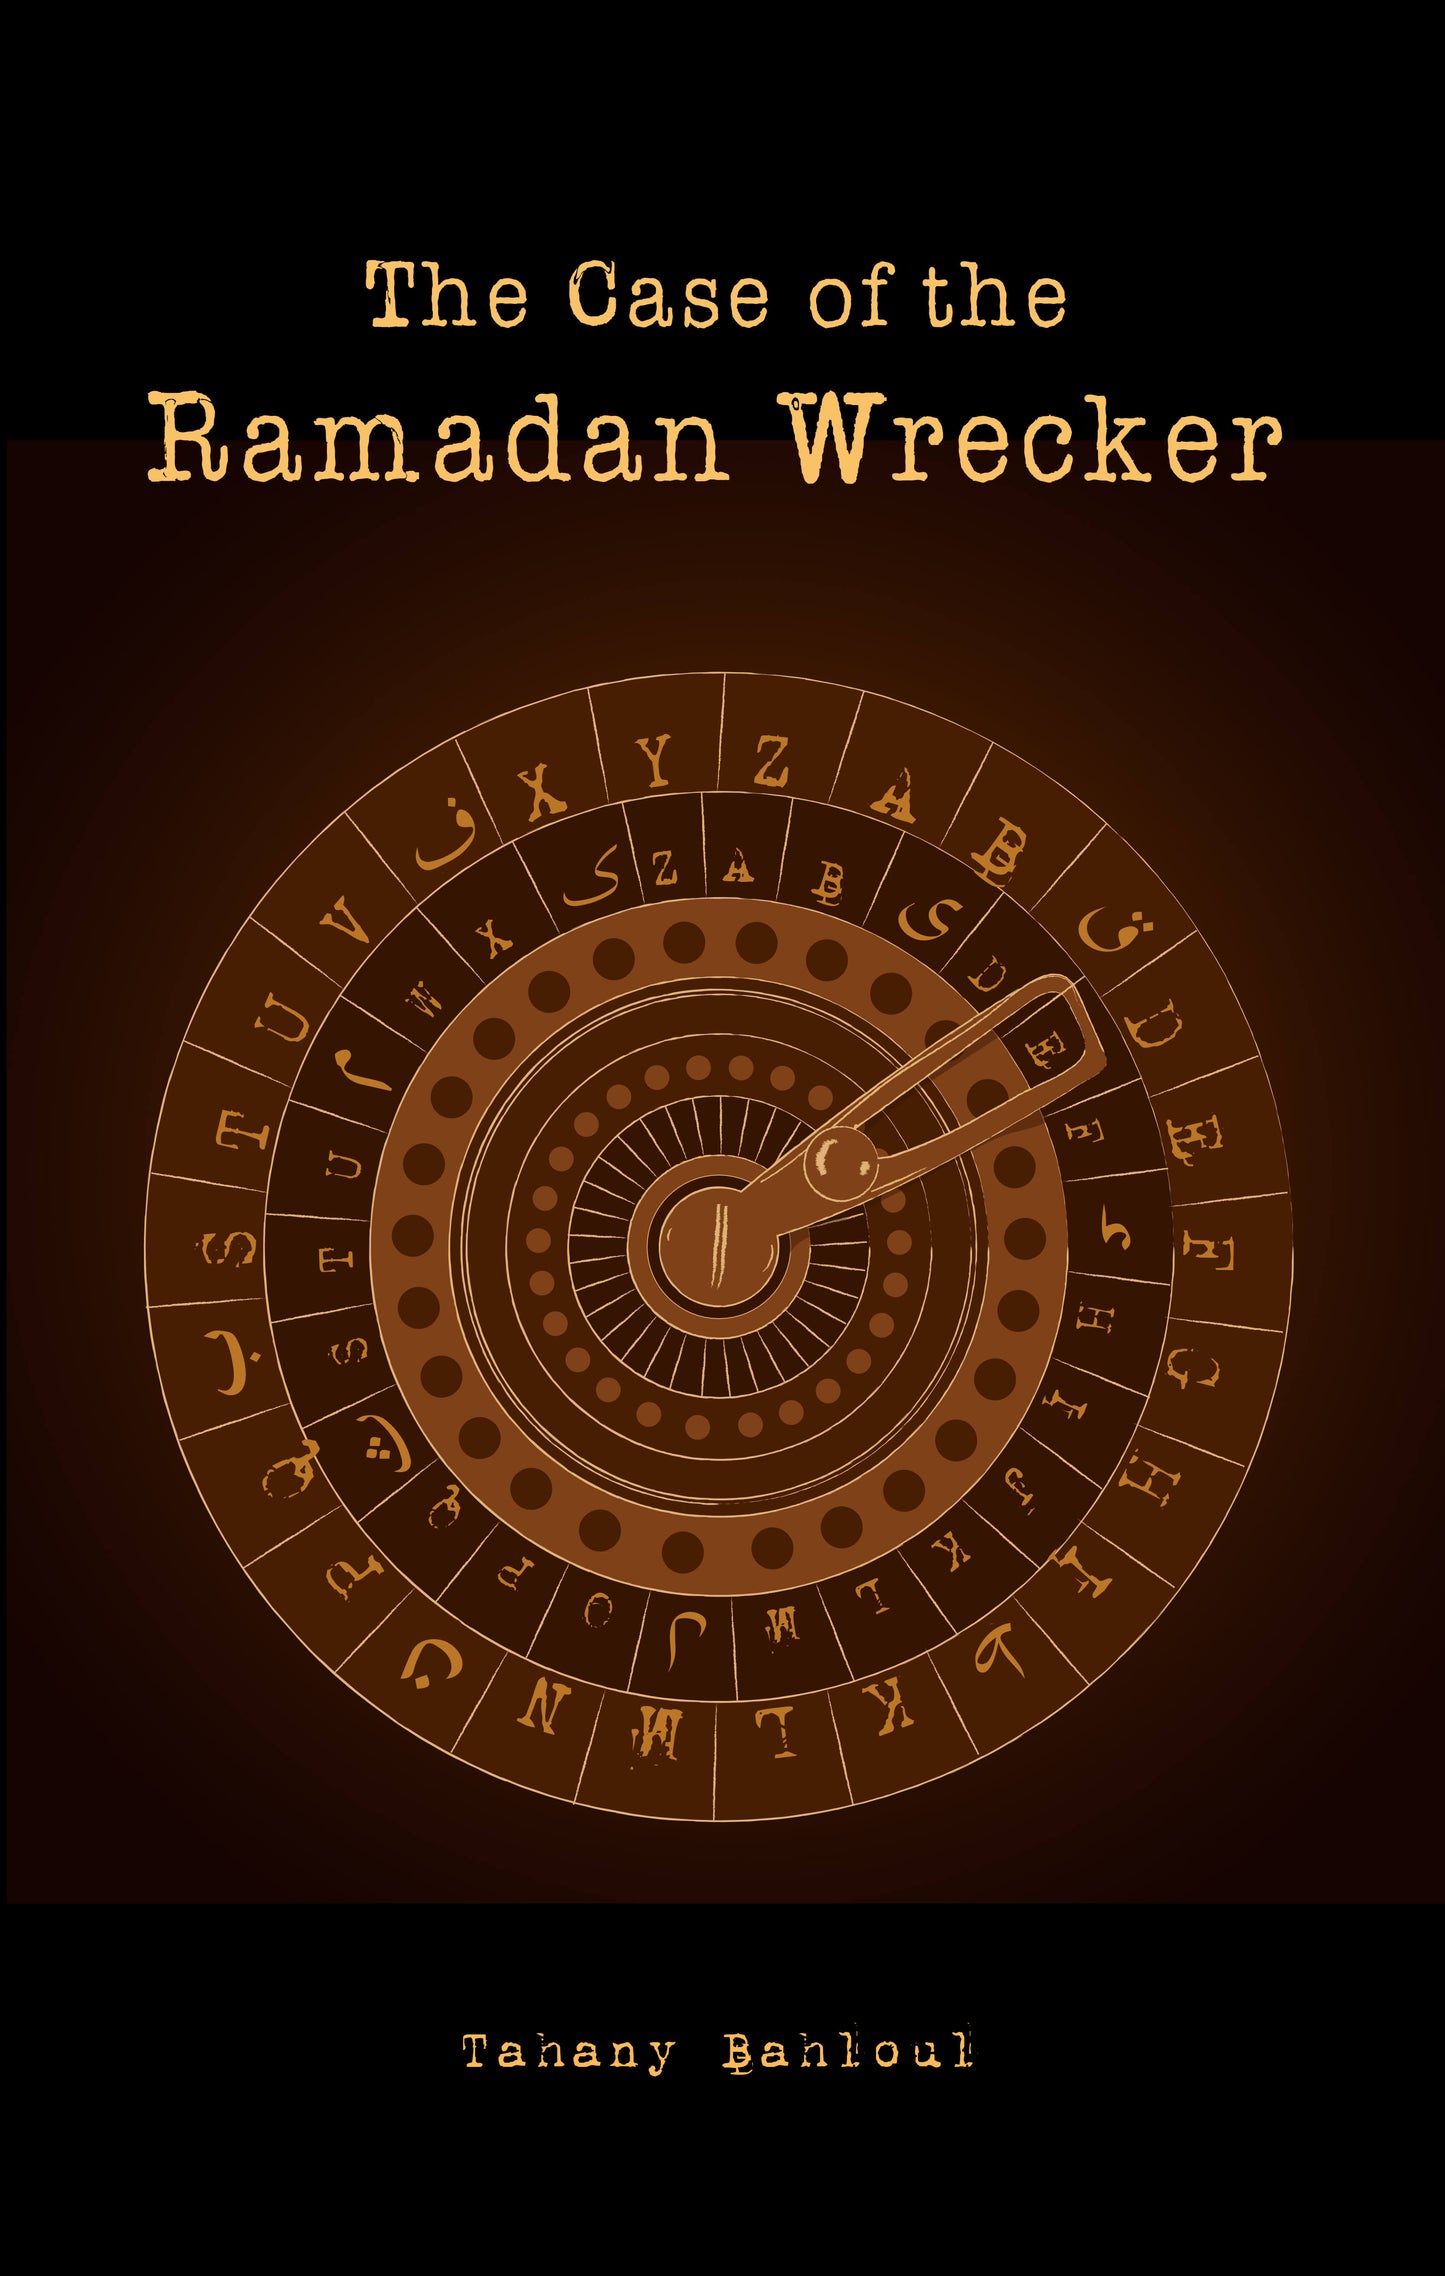 The Case of the Ramadan Wrecker (Revised 3rd Edition)